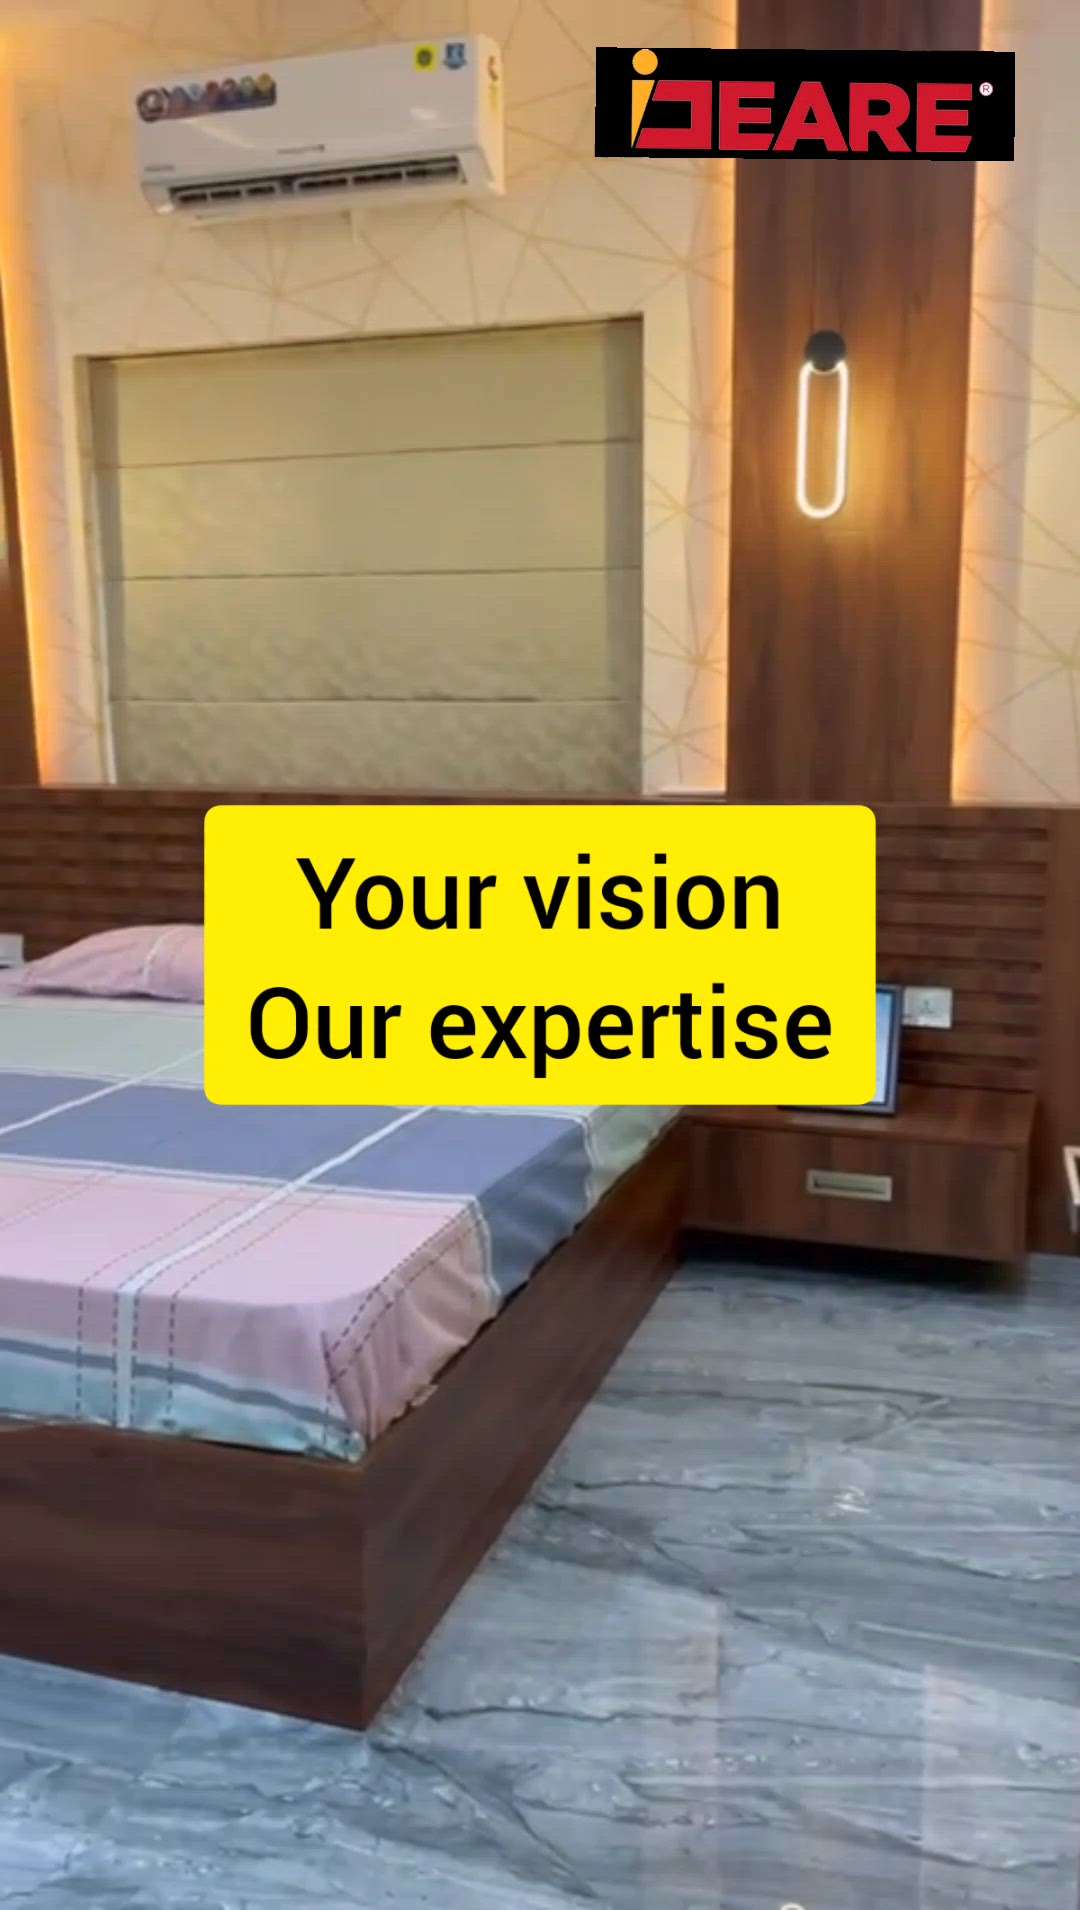 #BedroomDecor #MasterBedroom #bedroomrenovation #makeover #ideareinteriors #HouseRenovation #InteriorDesign #fullhouseinterior
ideare group is a promising group of builders, u can contact for home construction renovation and for interior works, contact today